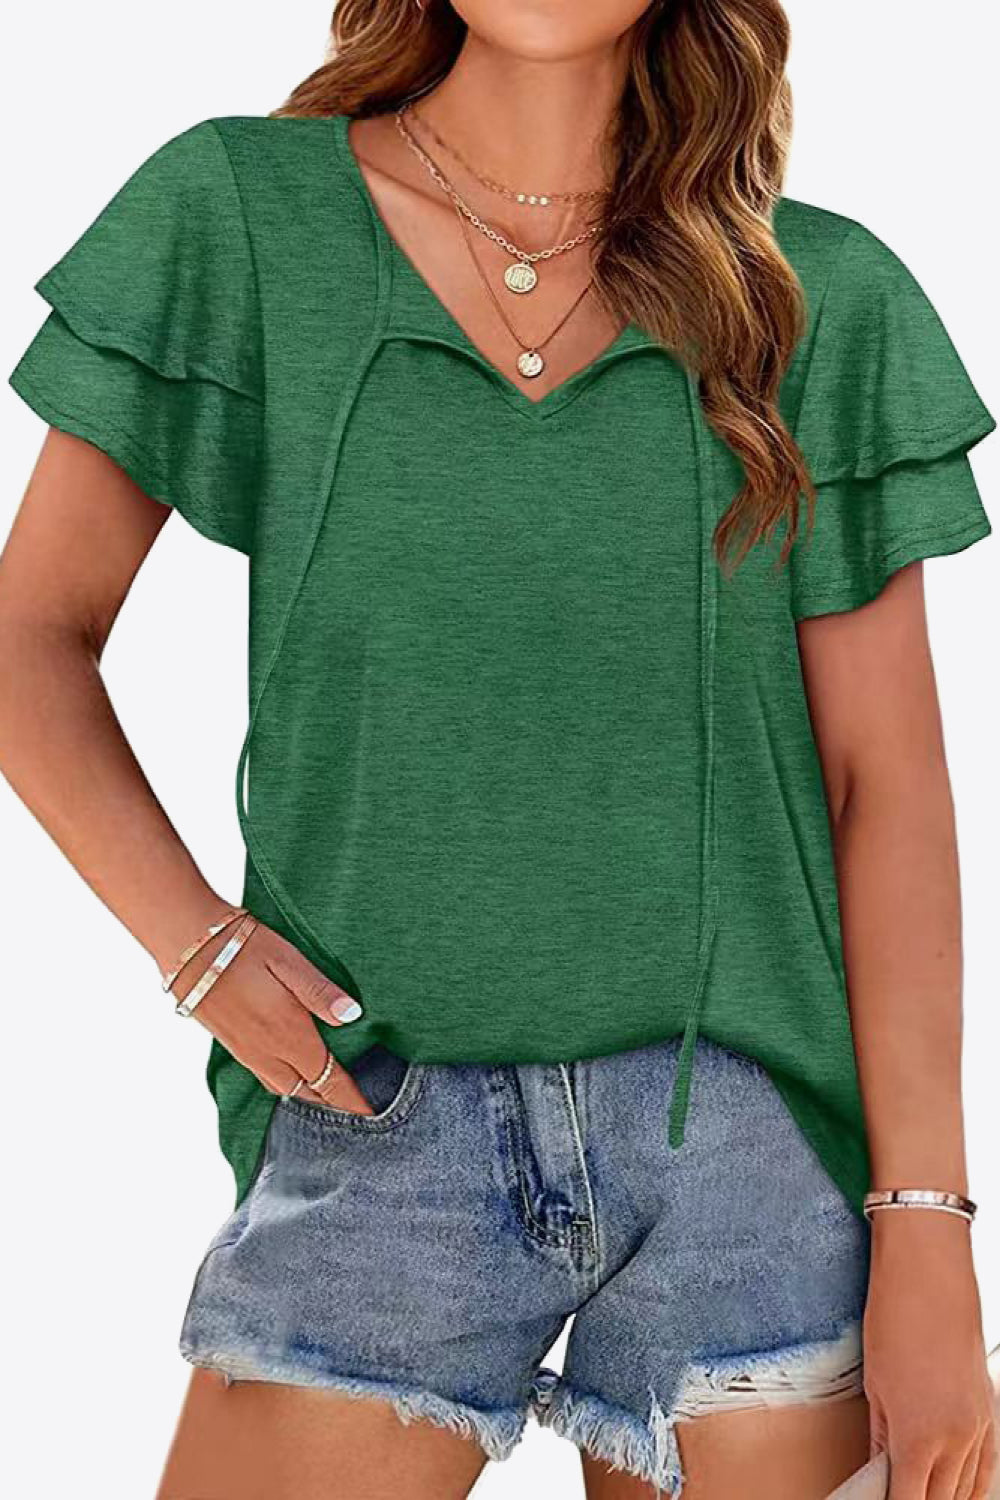 Tie-Neck Layered Flutter Sleeve Blouse